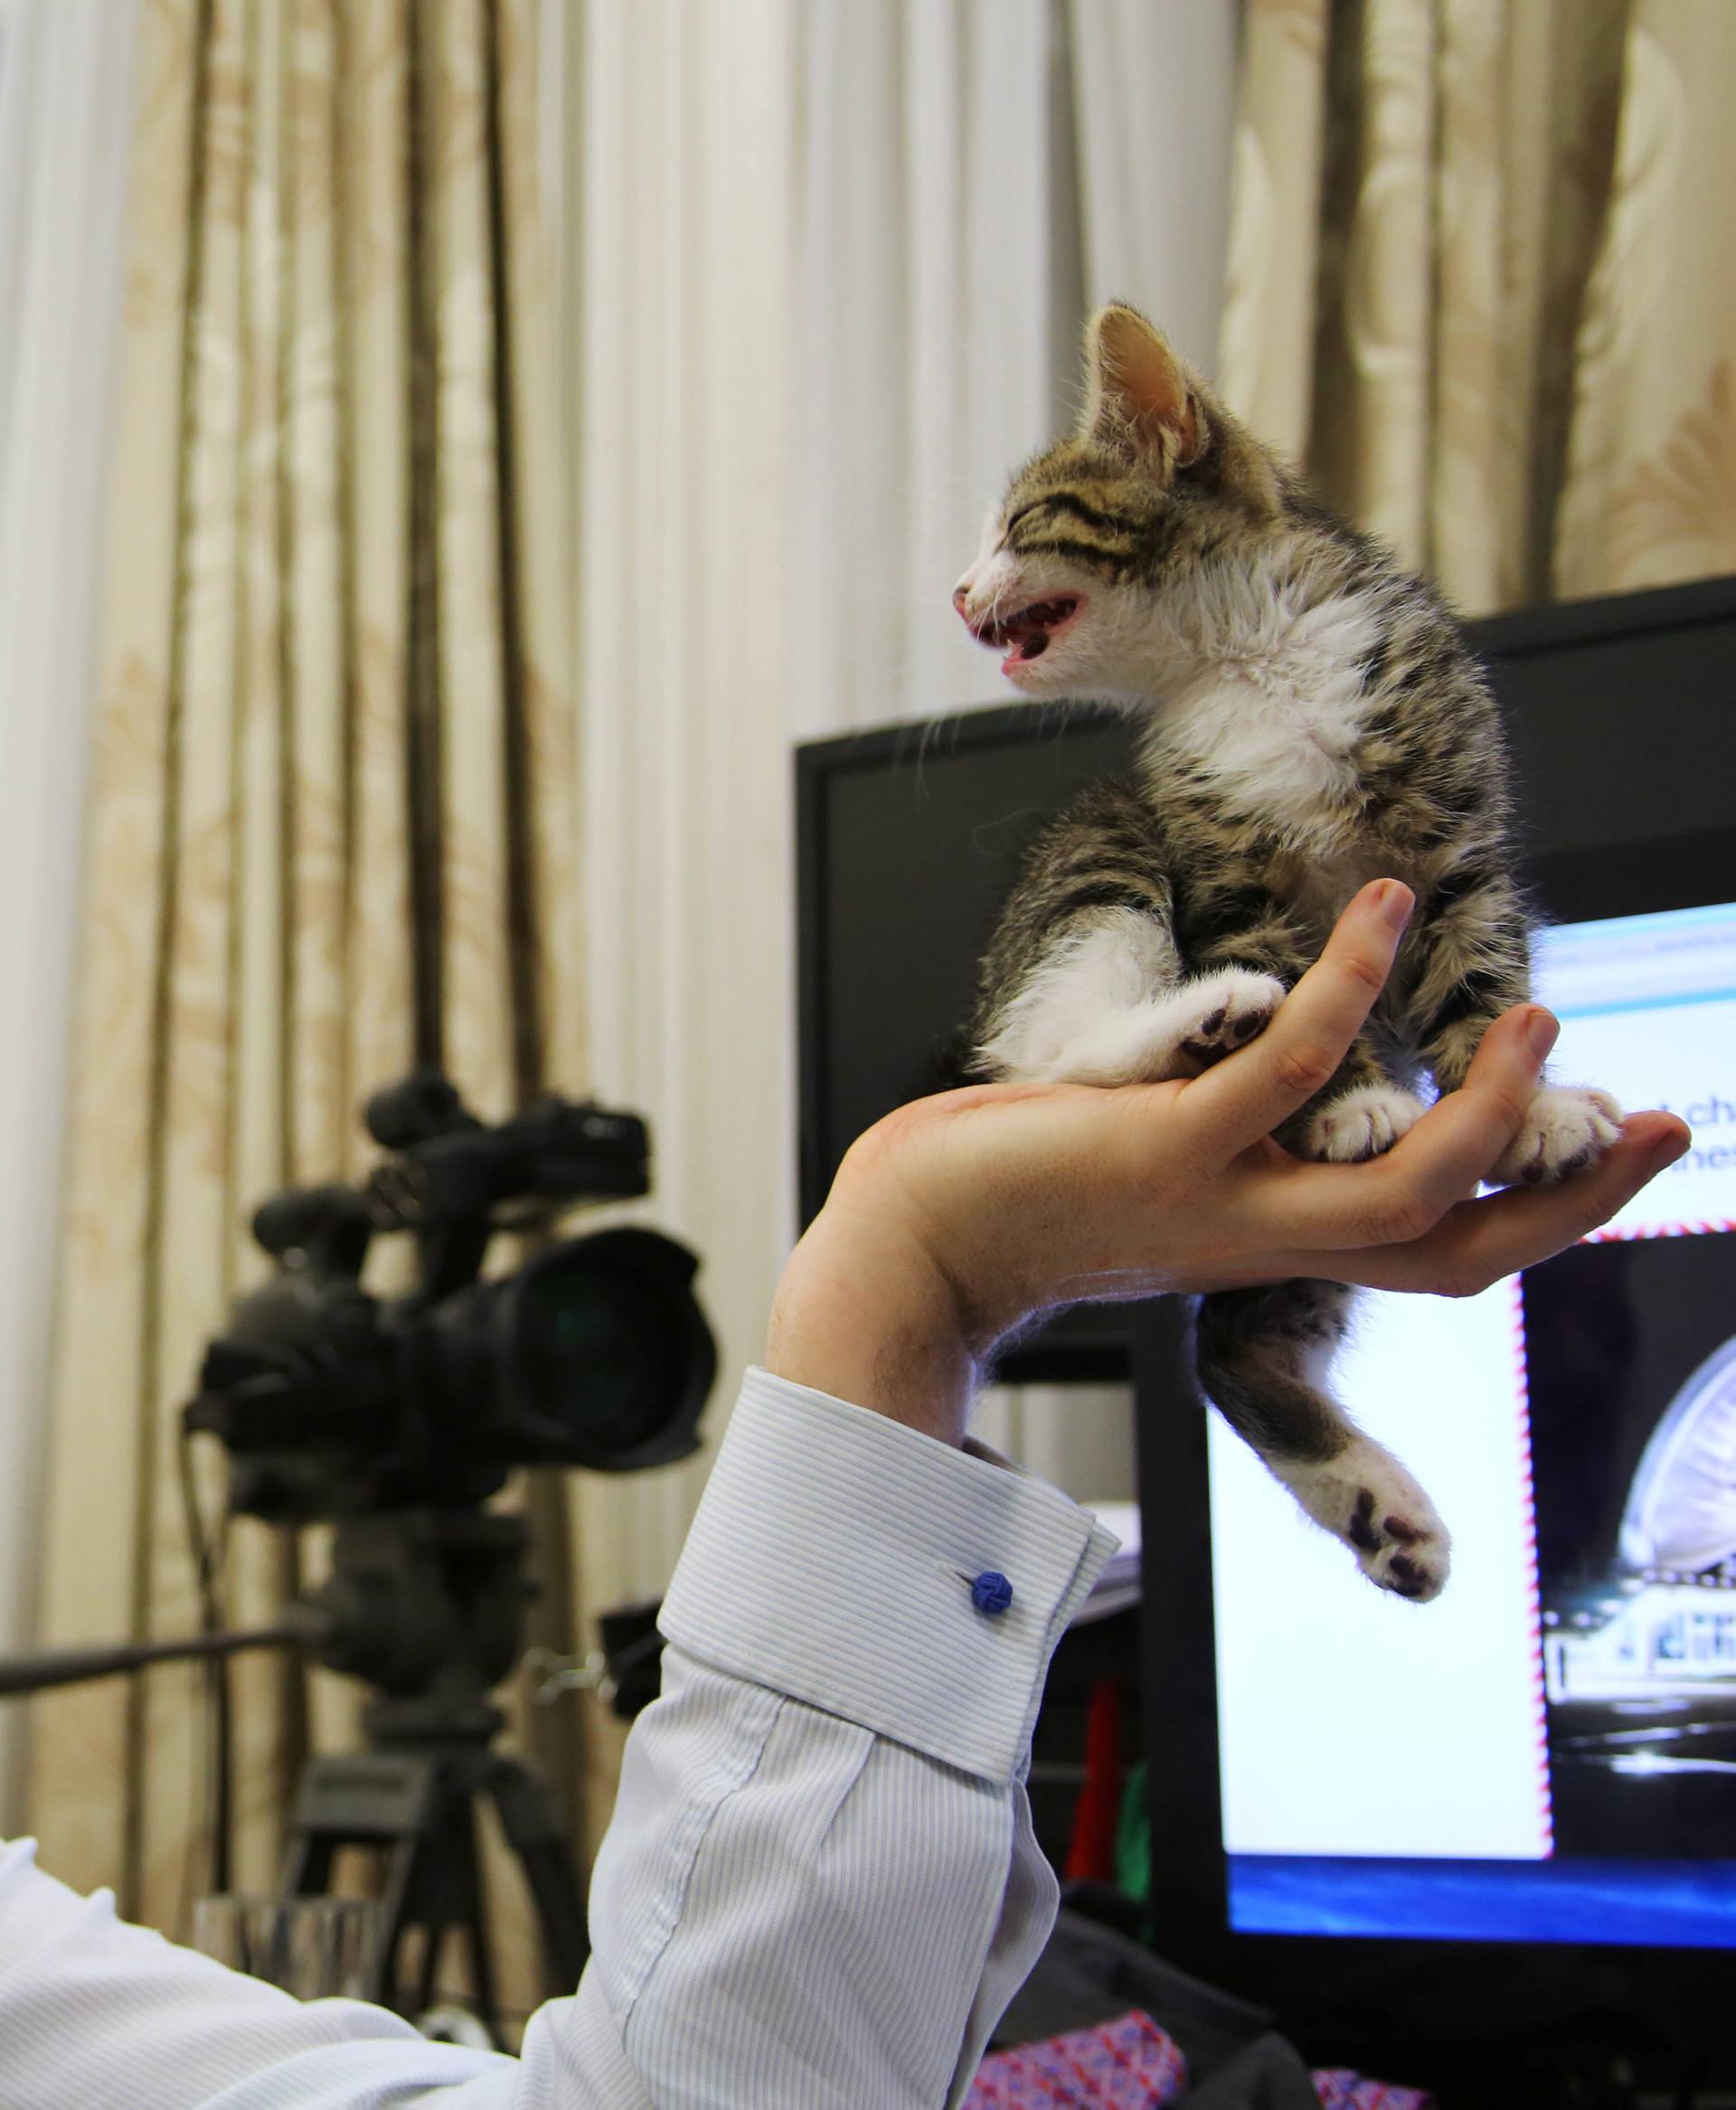 WikiLeaks founder Julian Assange holds up his new kitten at the Ecuadorian Embassy in central London, Britain